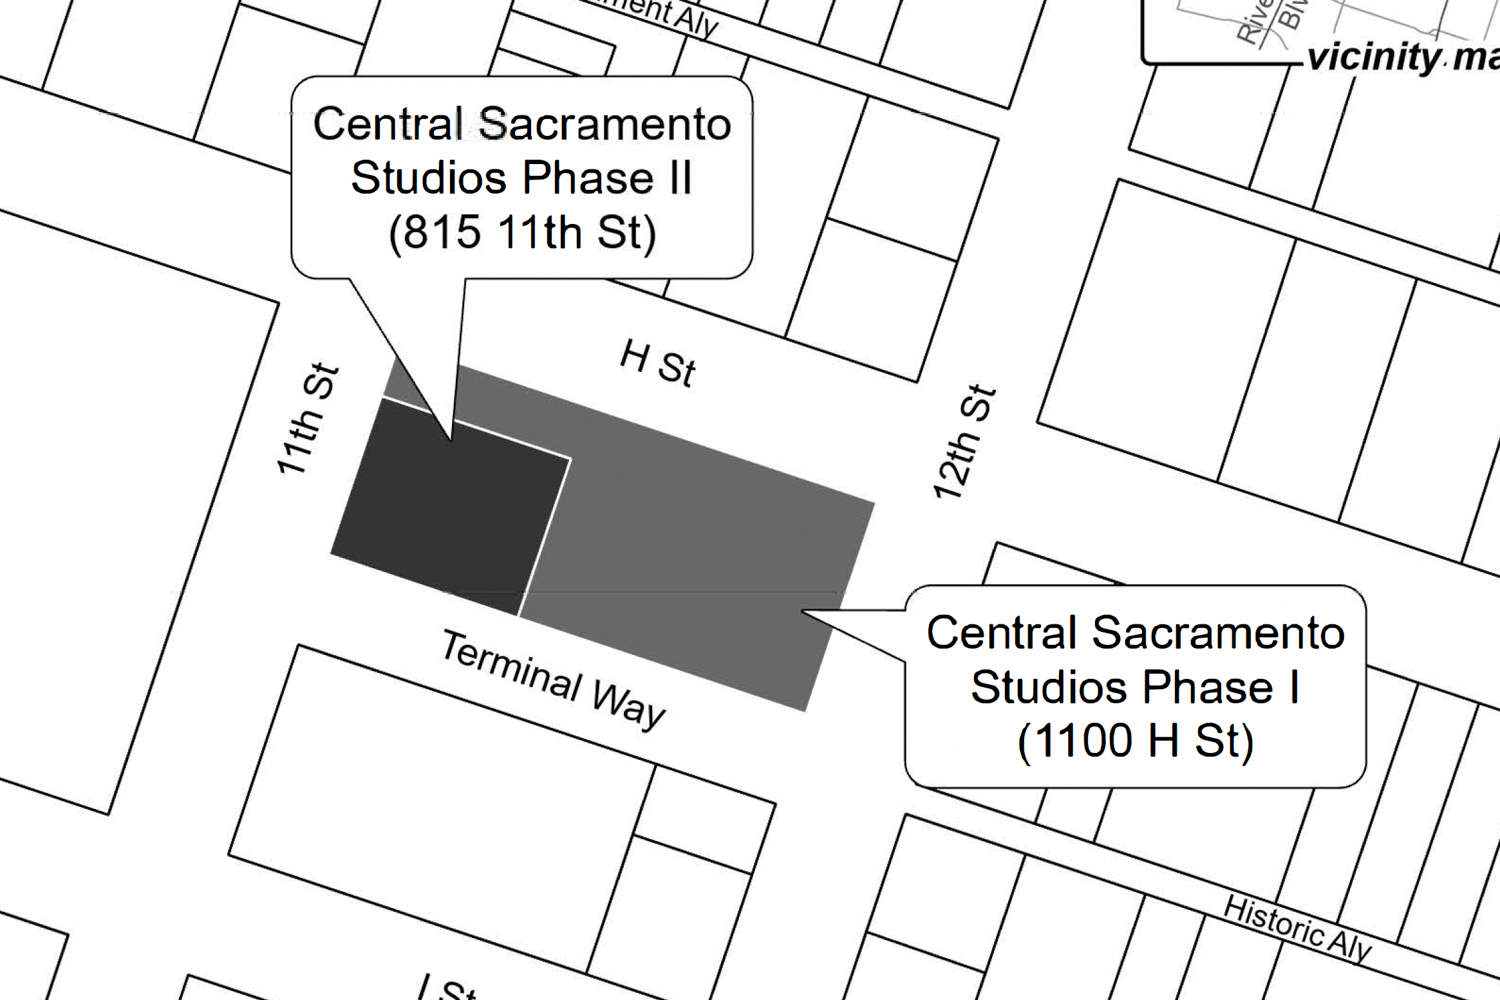 815 11th Street site map, illustration by Danco Communities